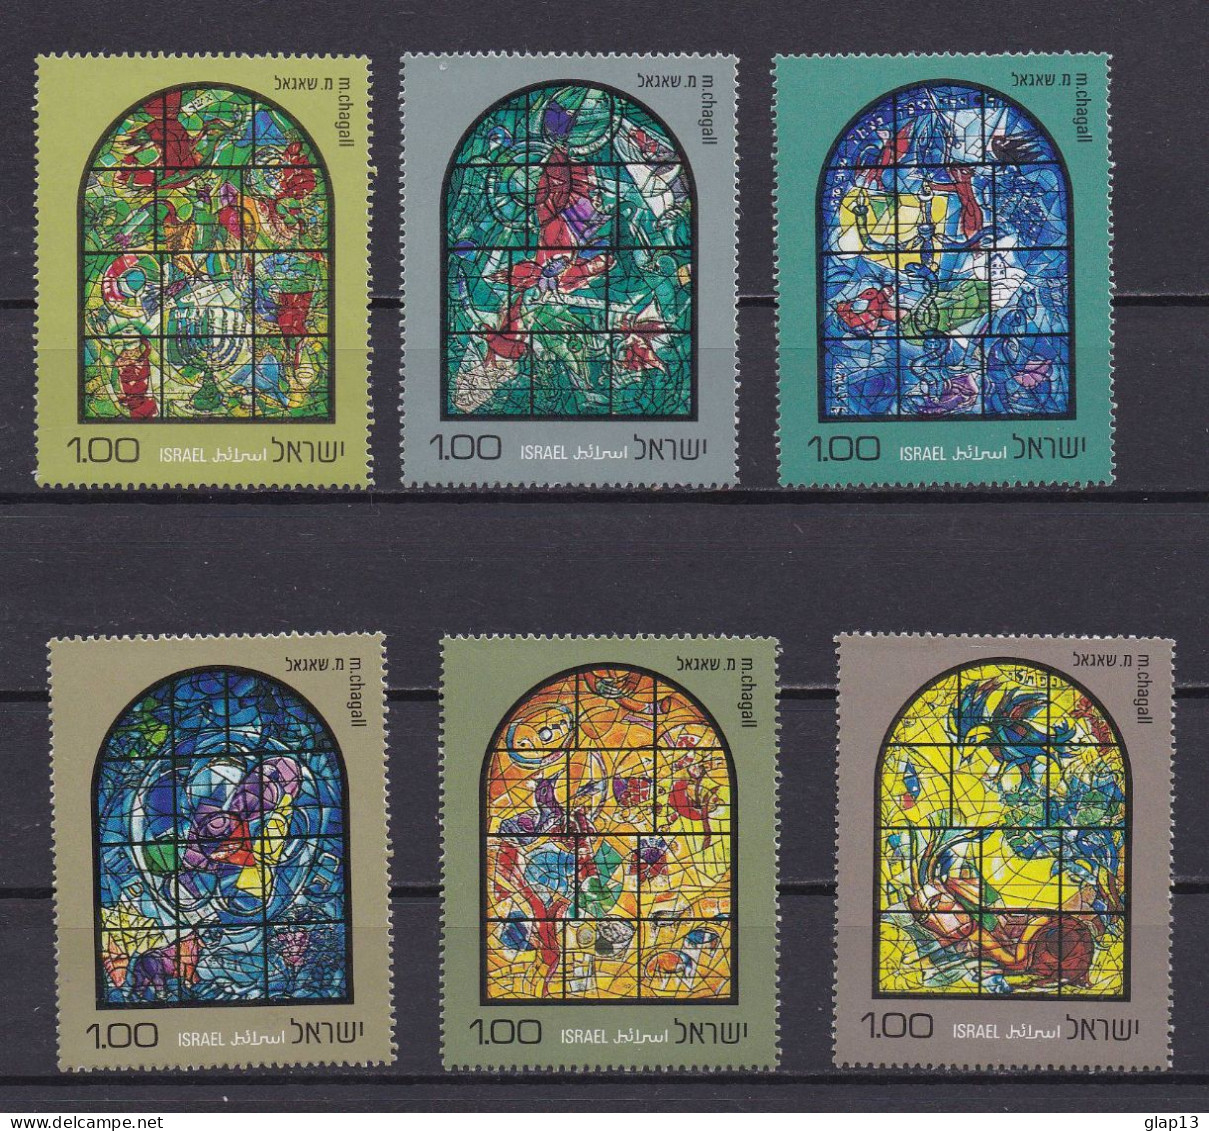 ISRAEL 1973 TIMBRE N°521/26 NEUF** VITRAUX DE CHAGALL - Unused Stamps (without Tabs)